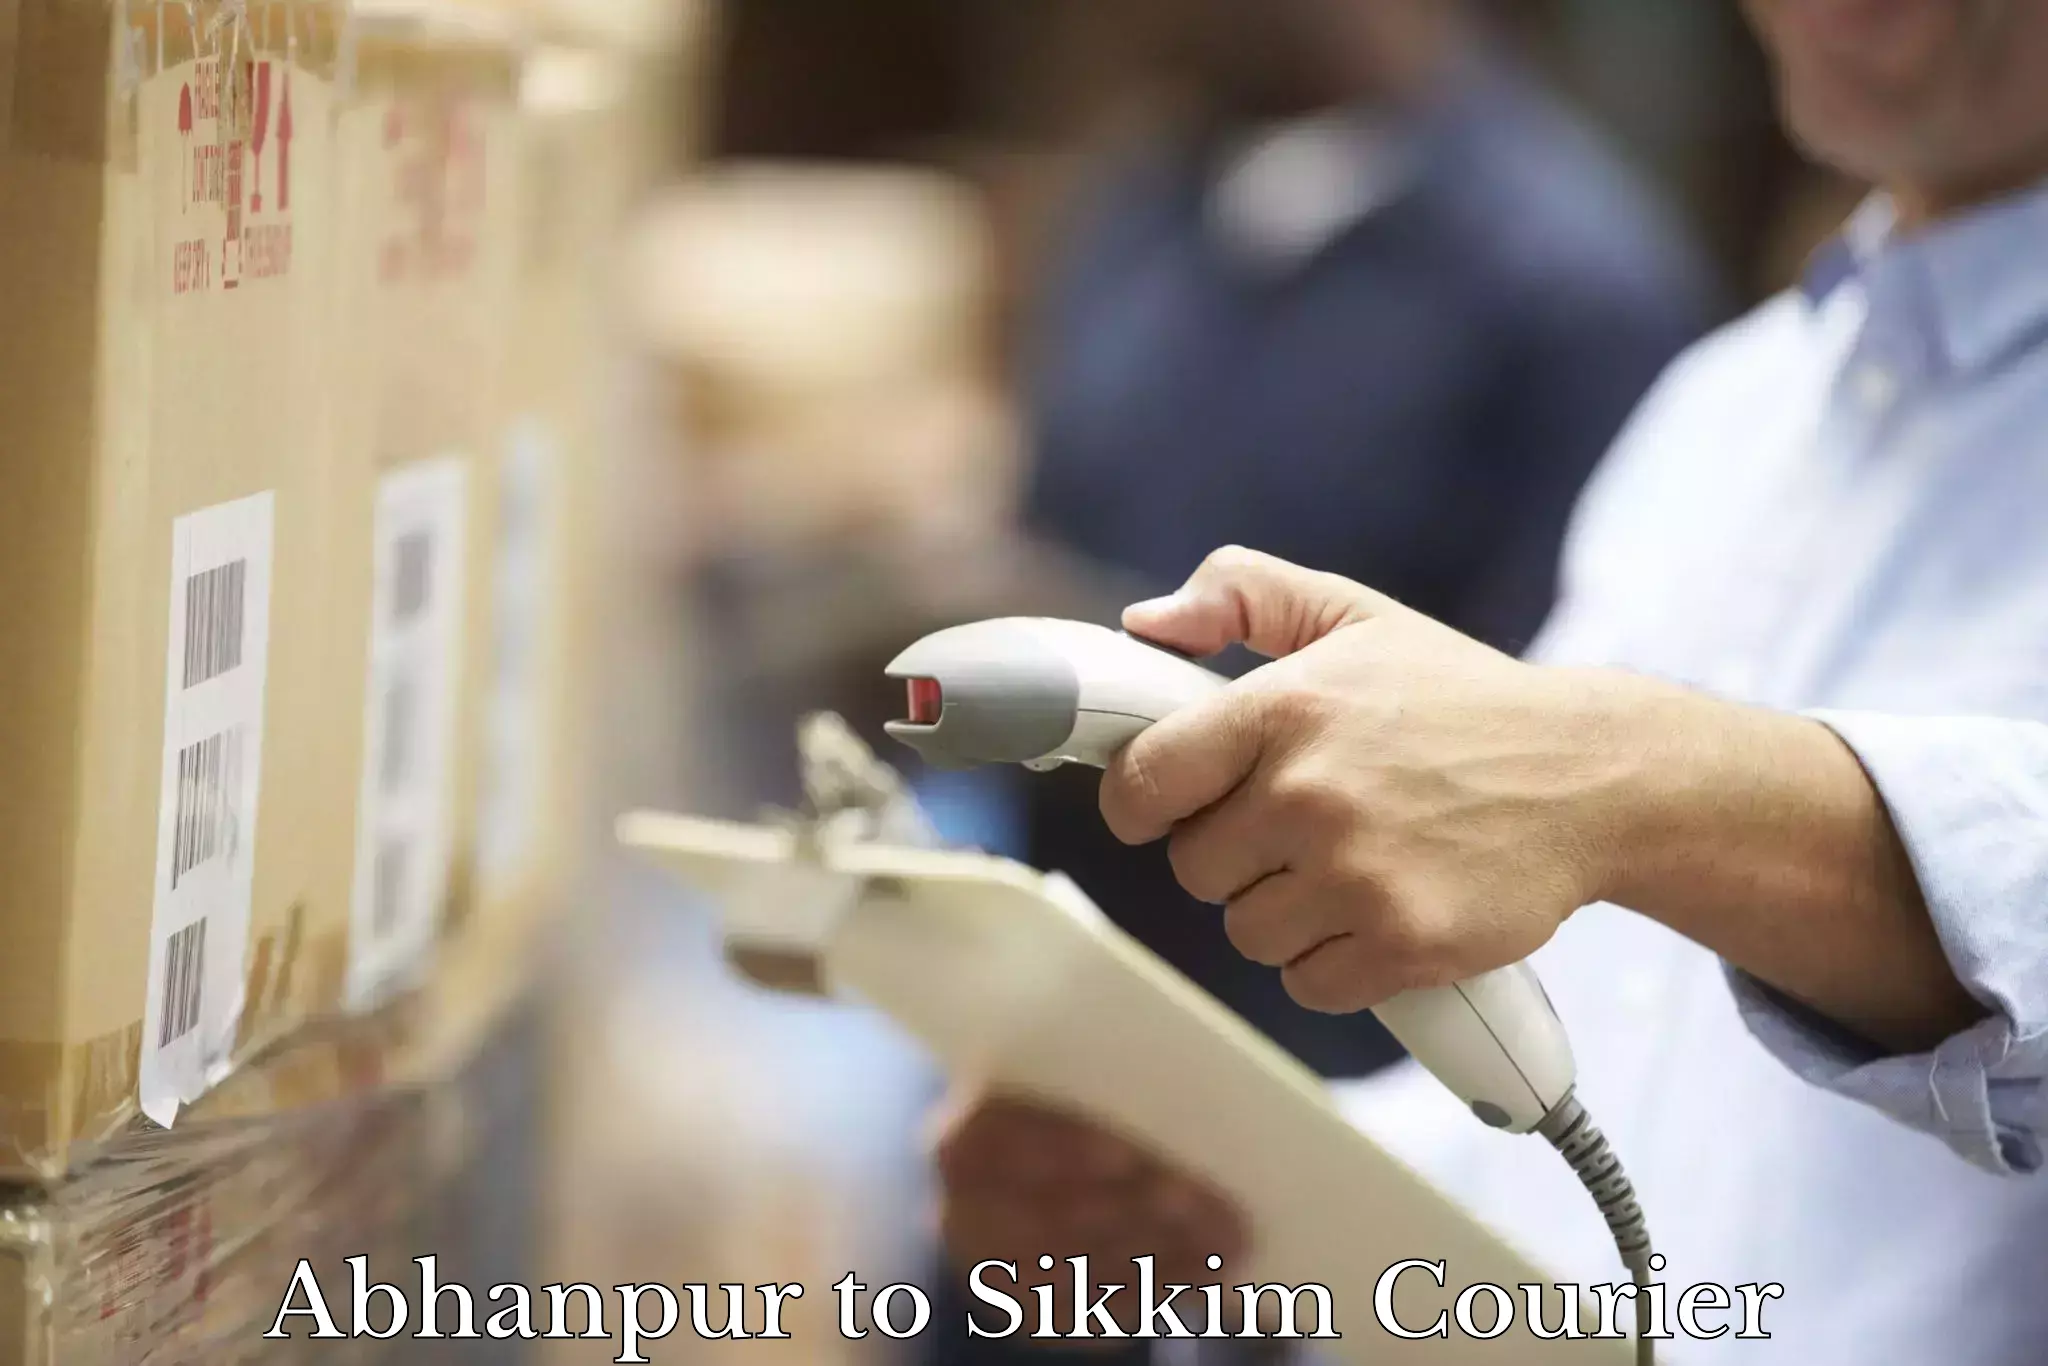 Delivery service partnership Abhanpur to Sikkim